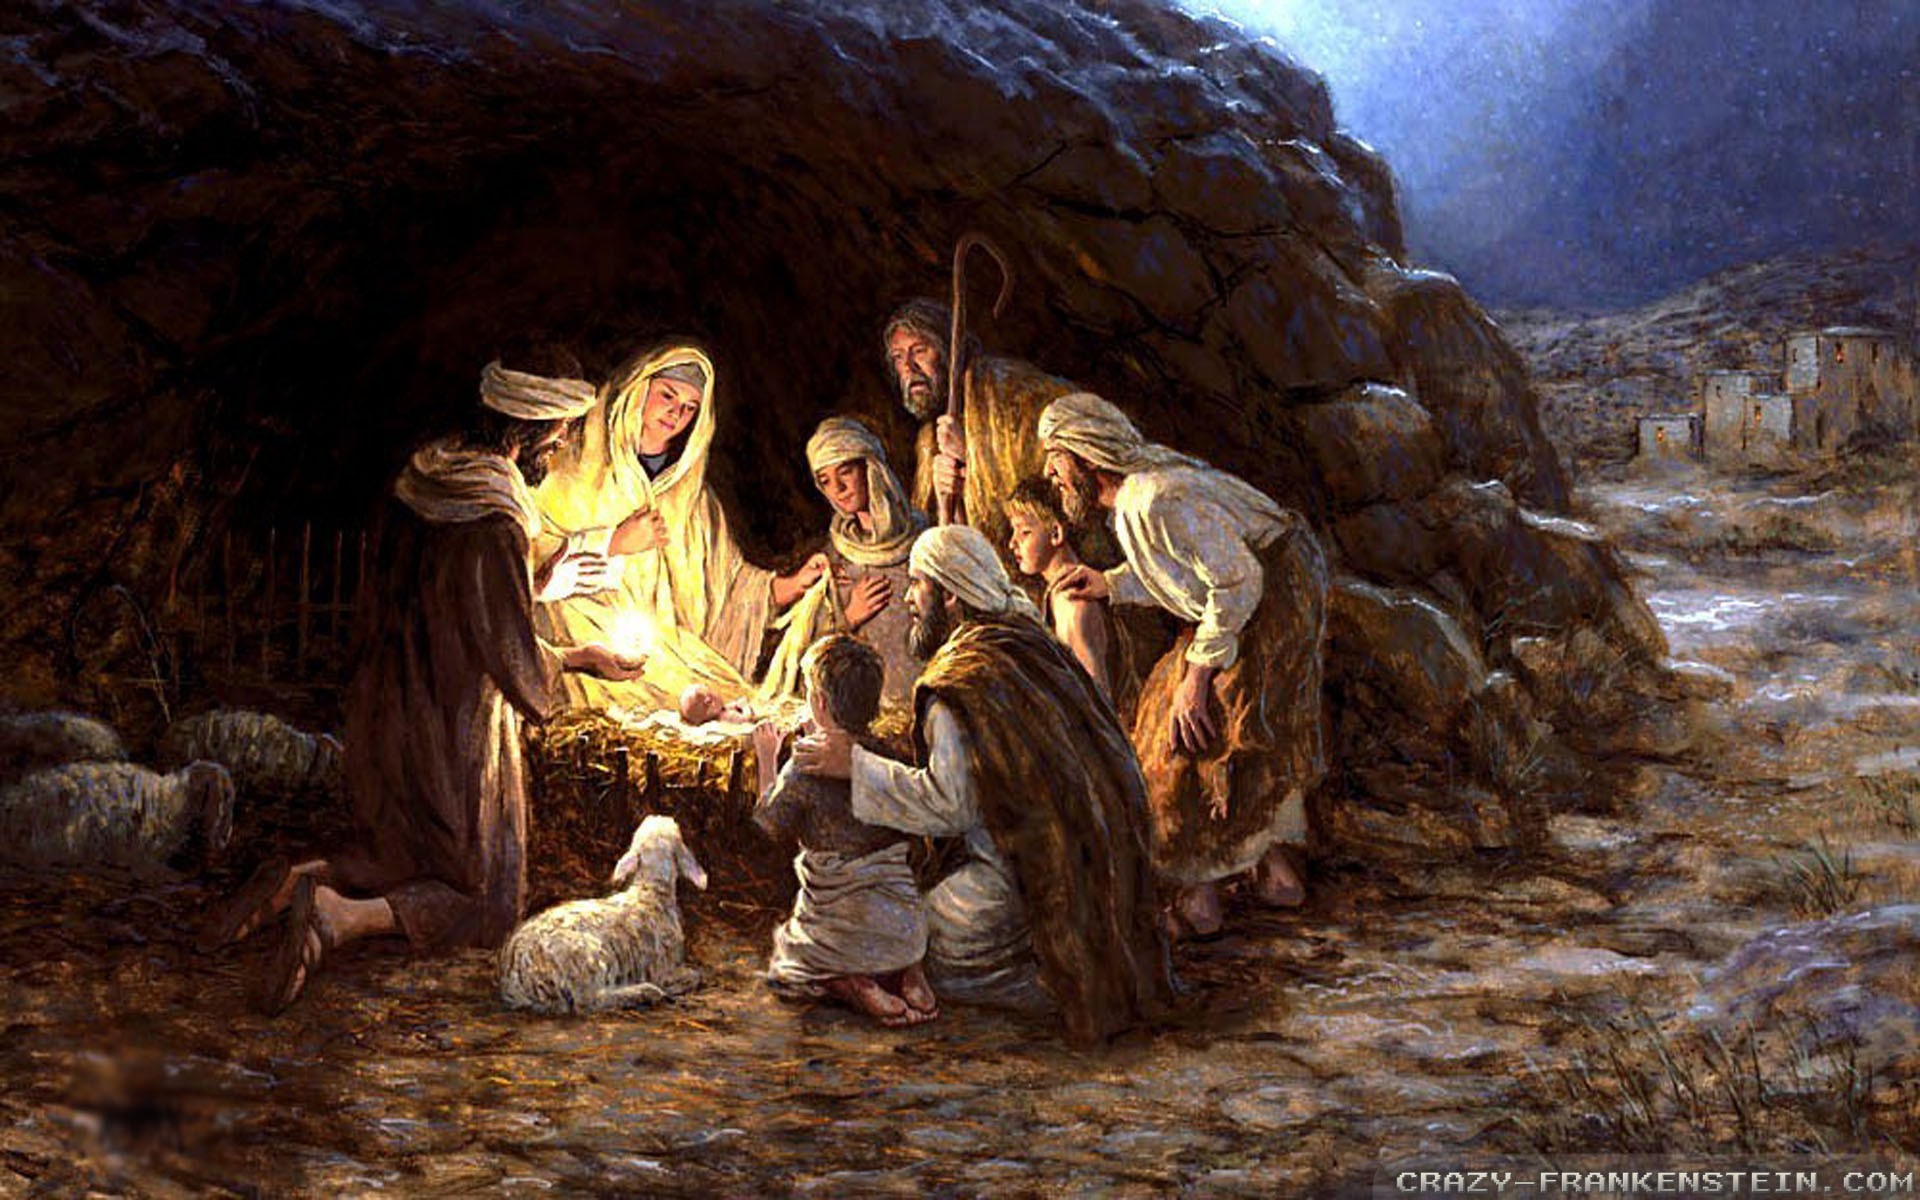 Christmas Nativity Scene Wallpaper ·① Download Free Hd Backgrounds For 